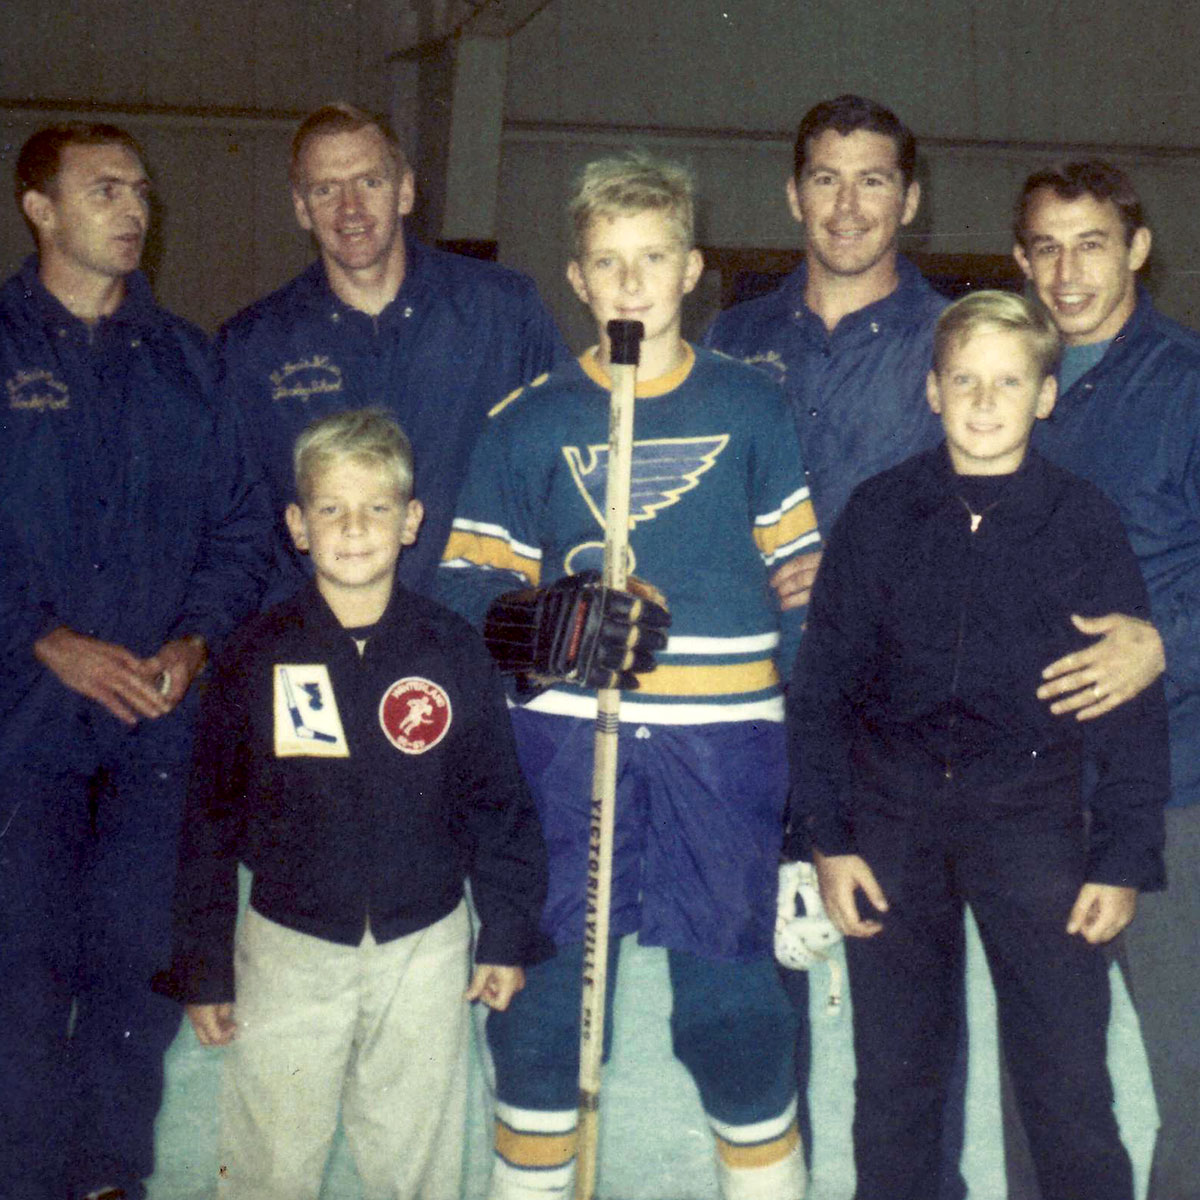 Young Kriegshauser Brothers with former St. Louis Blues players